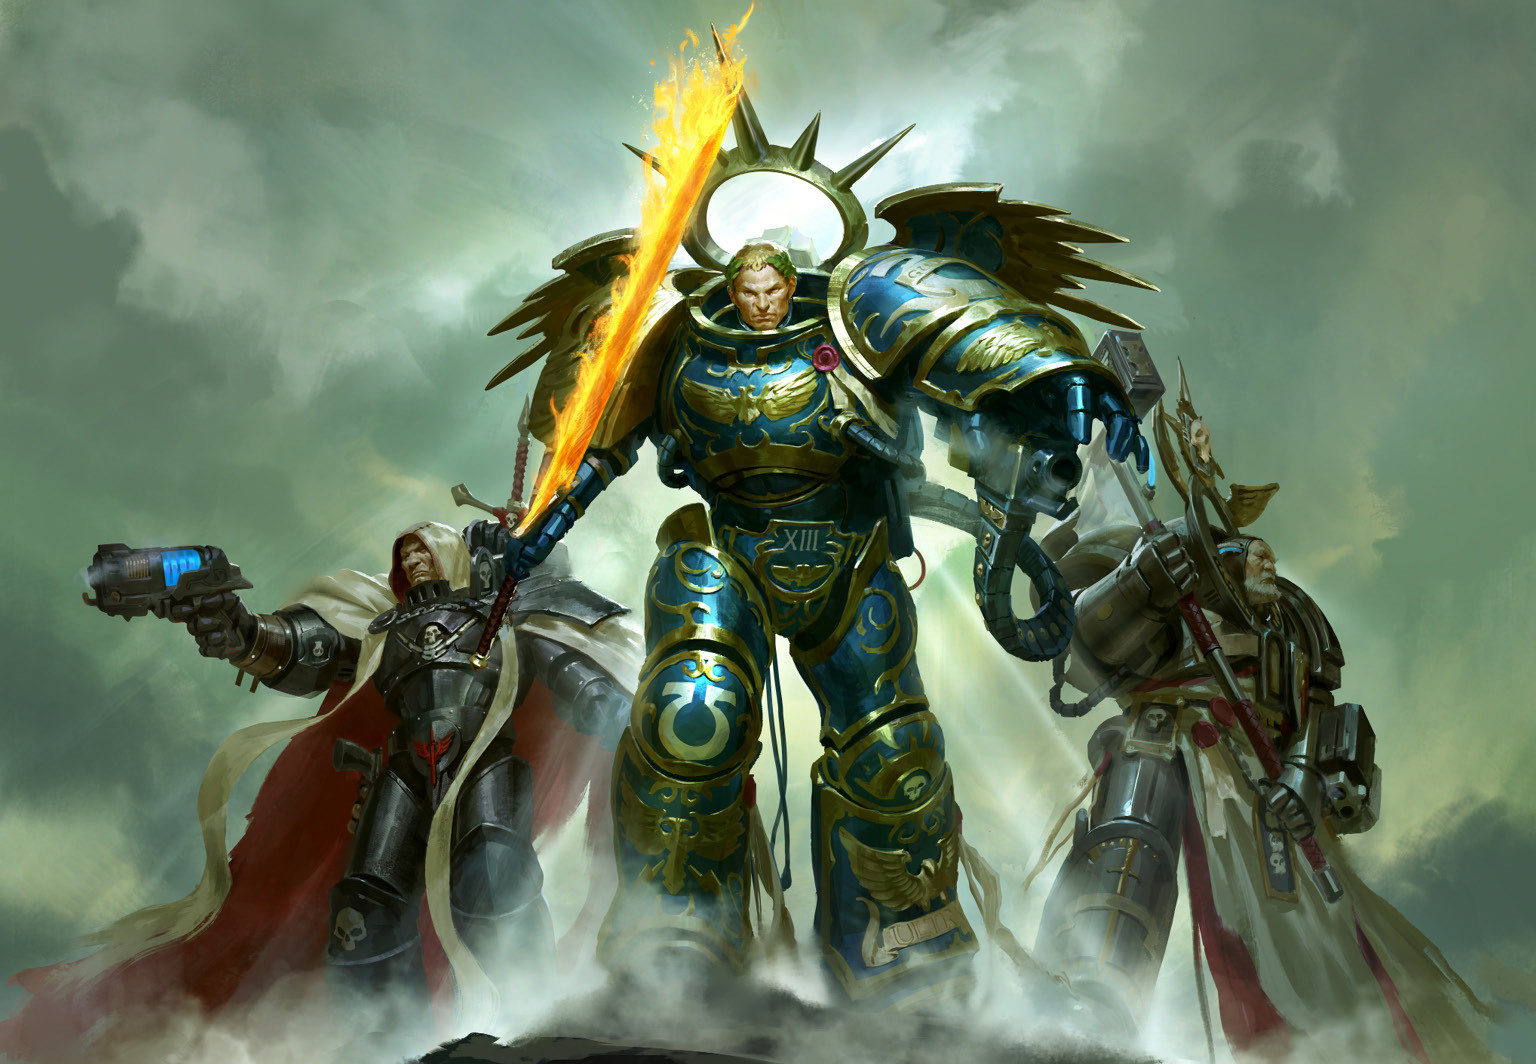 Gathering Storm: Rise of the Primarch - High quality images from White Dwarf March 2017 - Warhammer 40k, Wh Art, Wh miniatures, Wh News, Gathering storm, , Modeling, Longpost